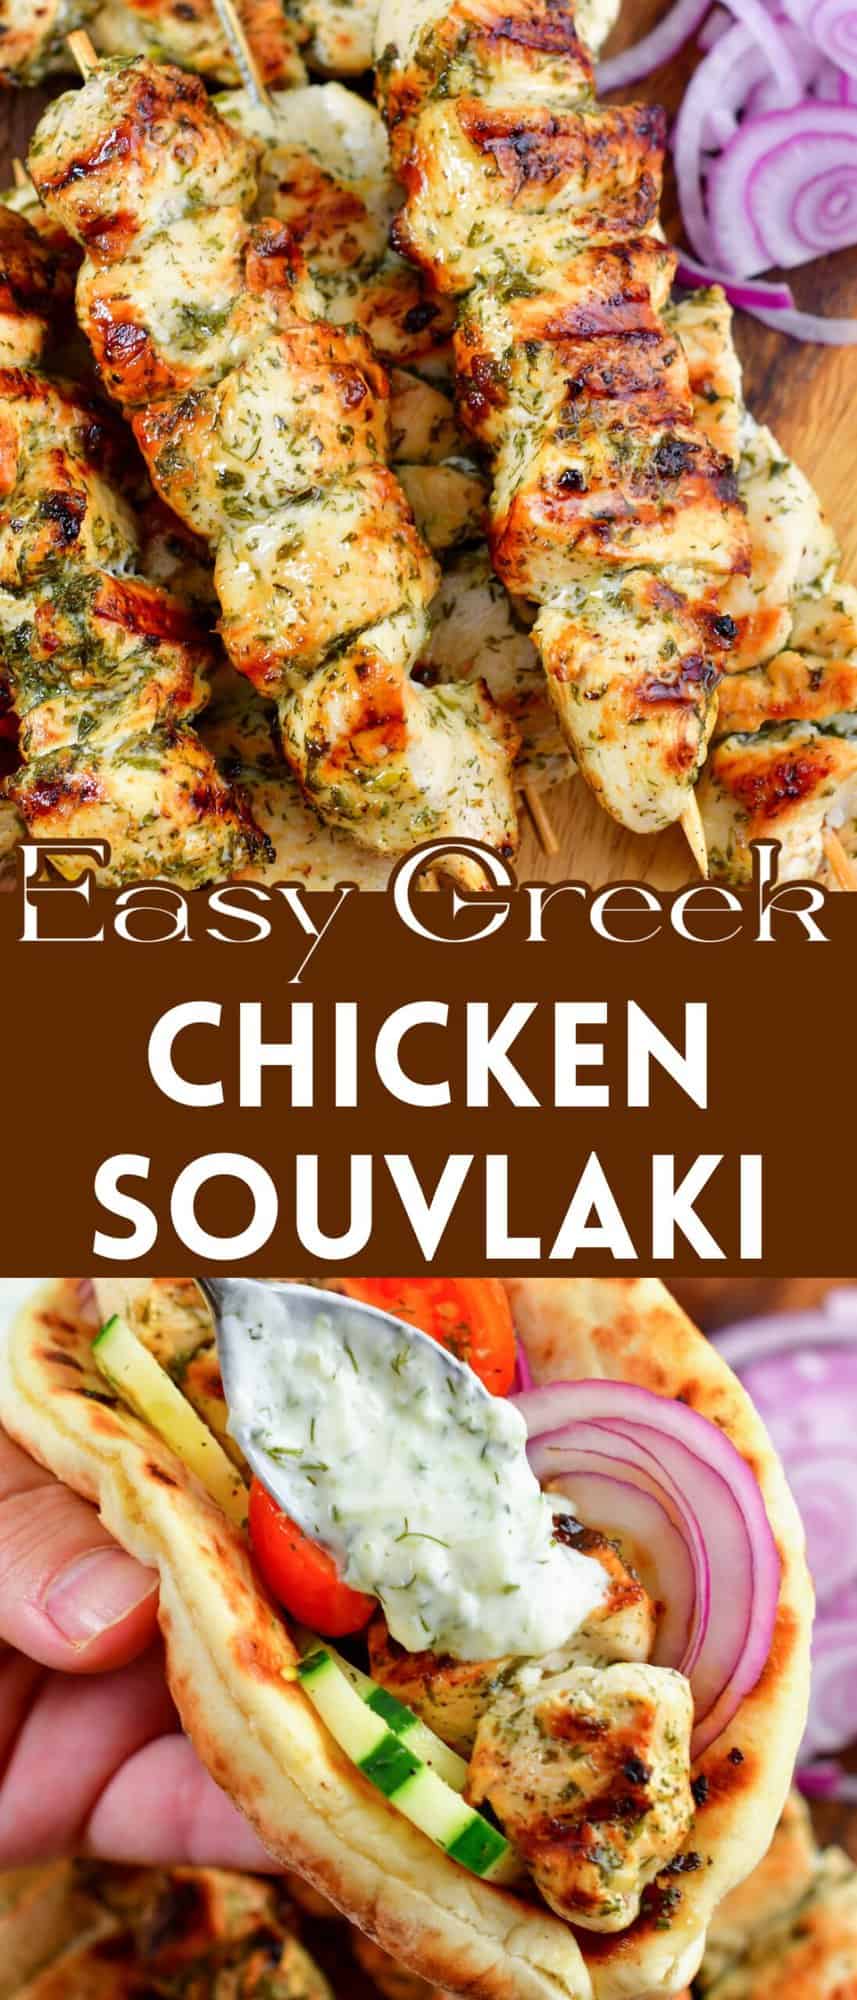 grilled chicken souvlaki skewers collage with chicken in pita